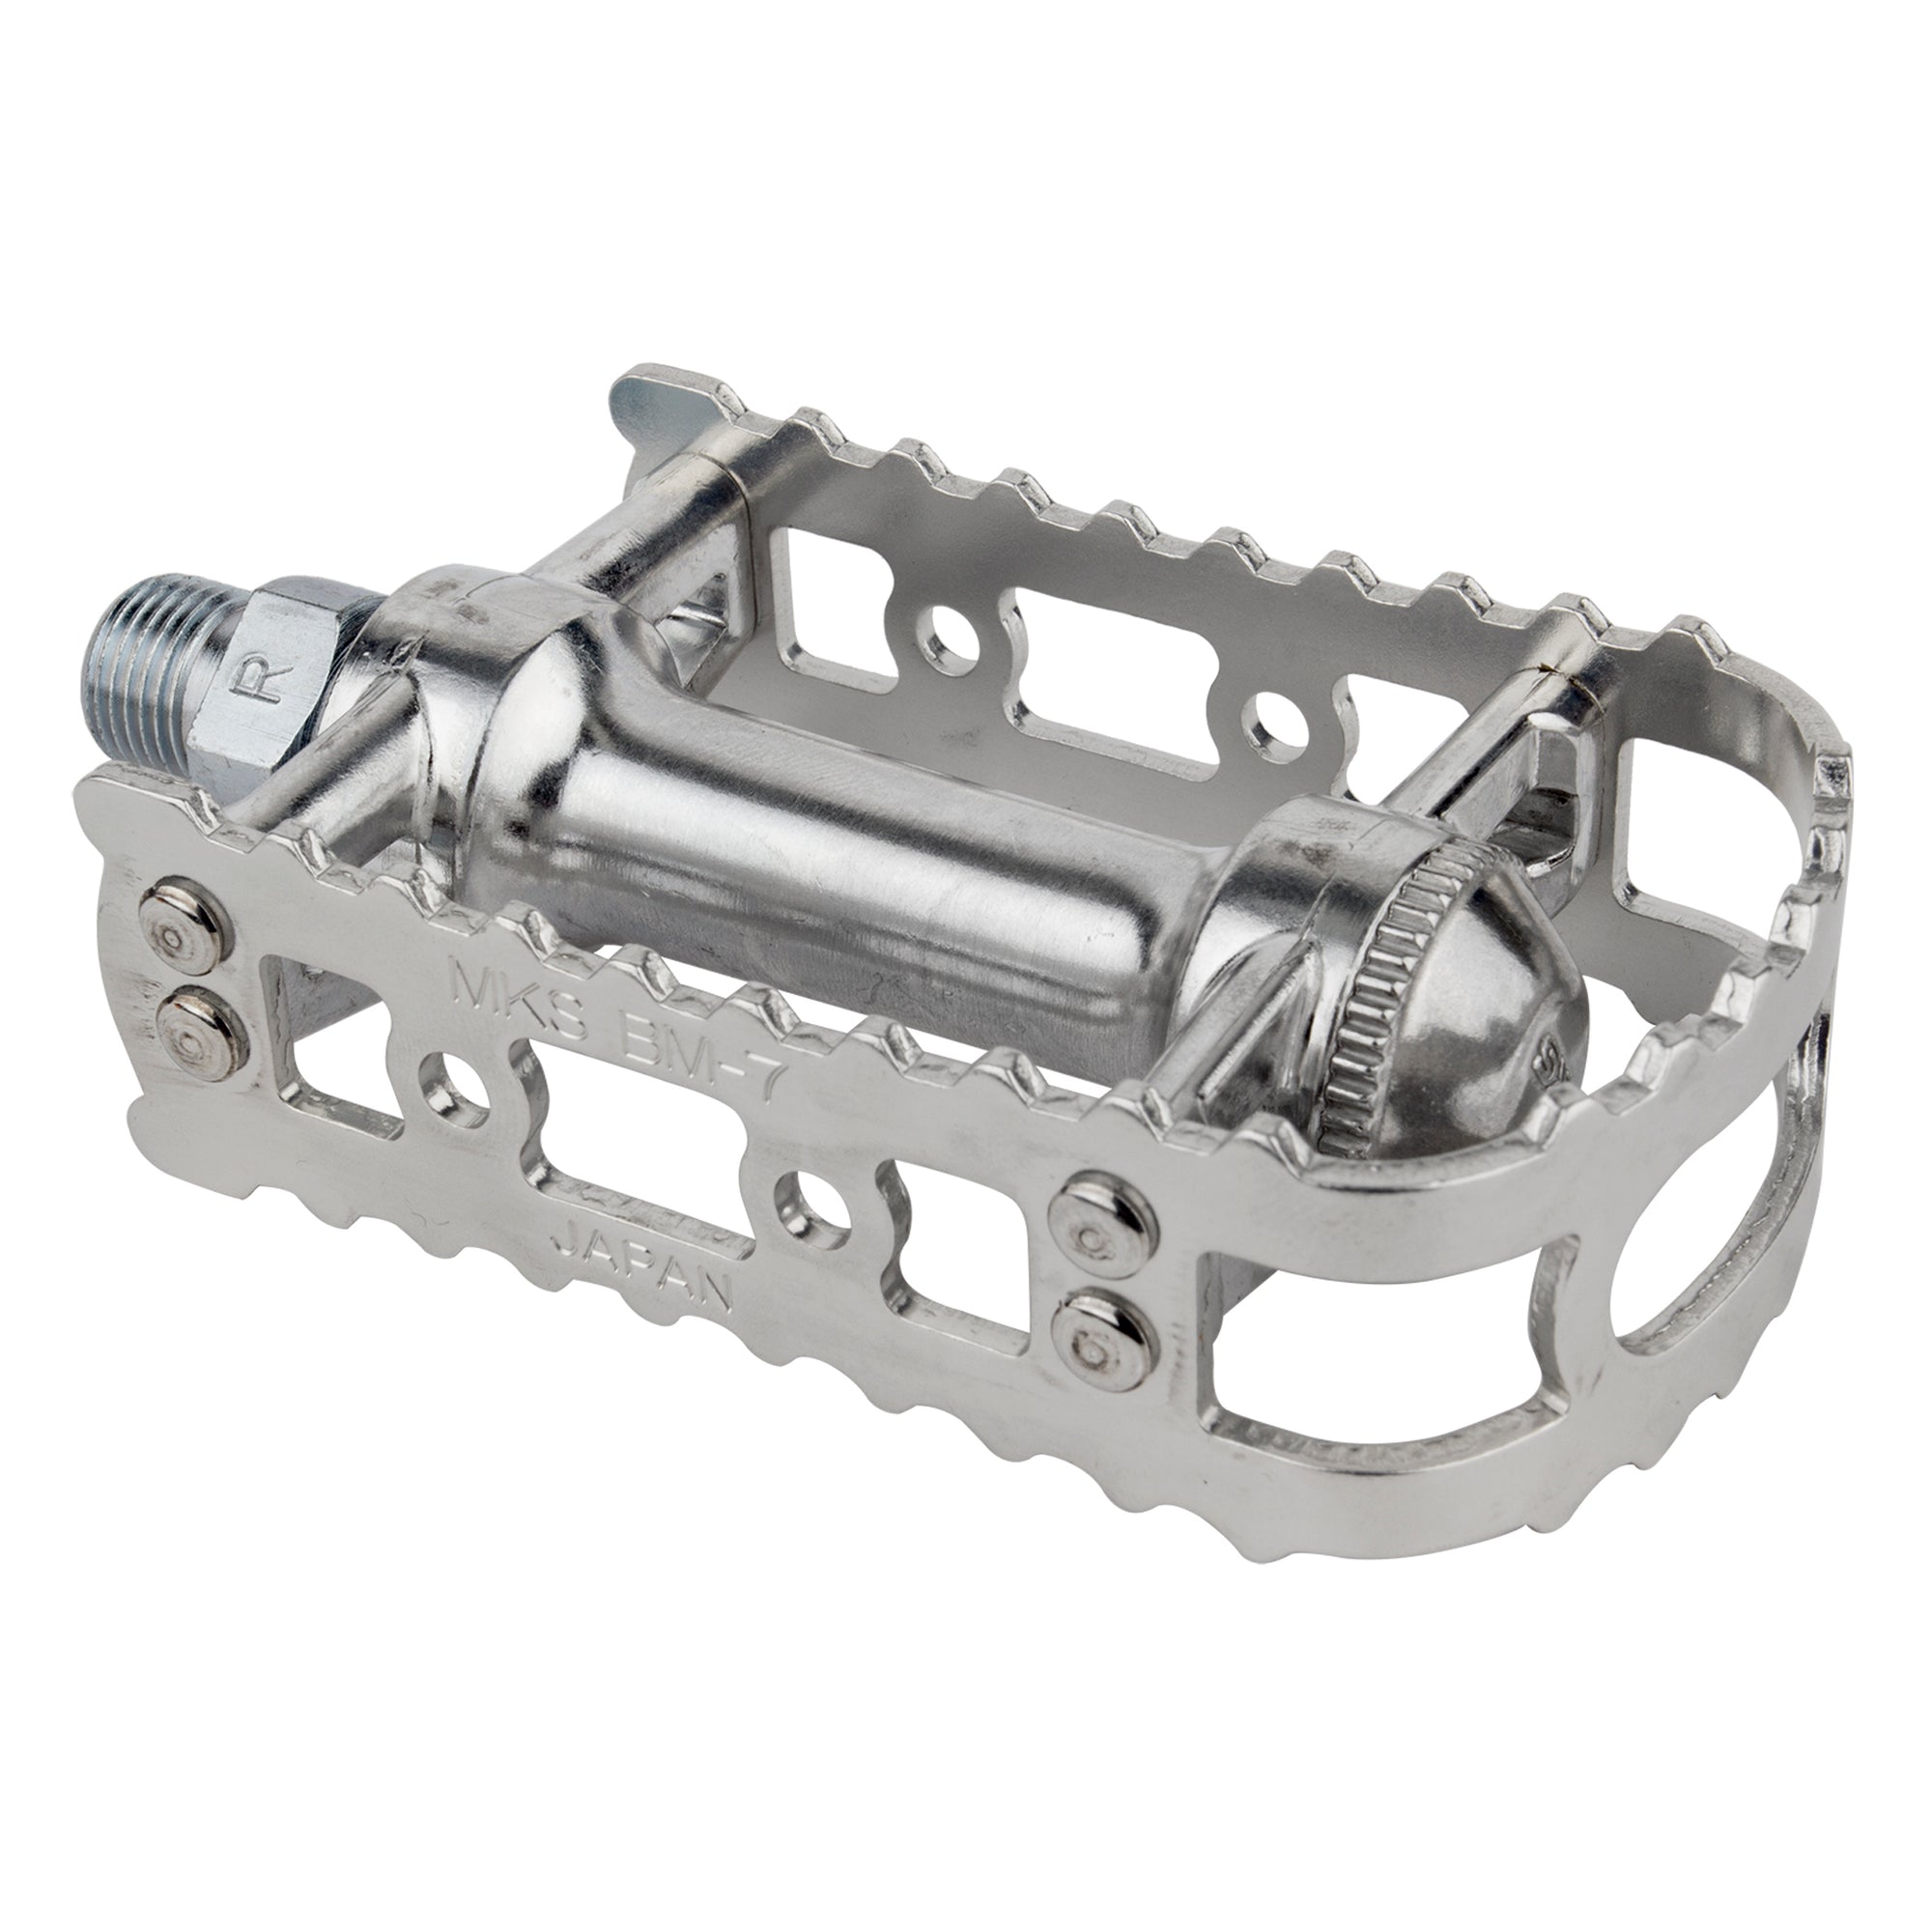 MKS BM-7 BMX Cage Pedals - 9/16" - Silver Anodized